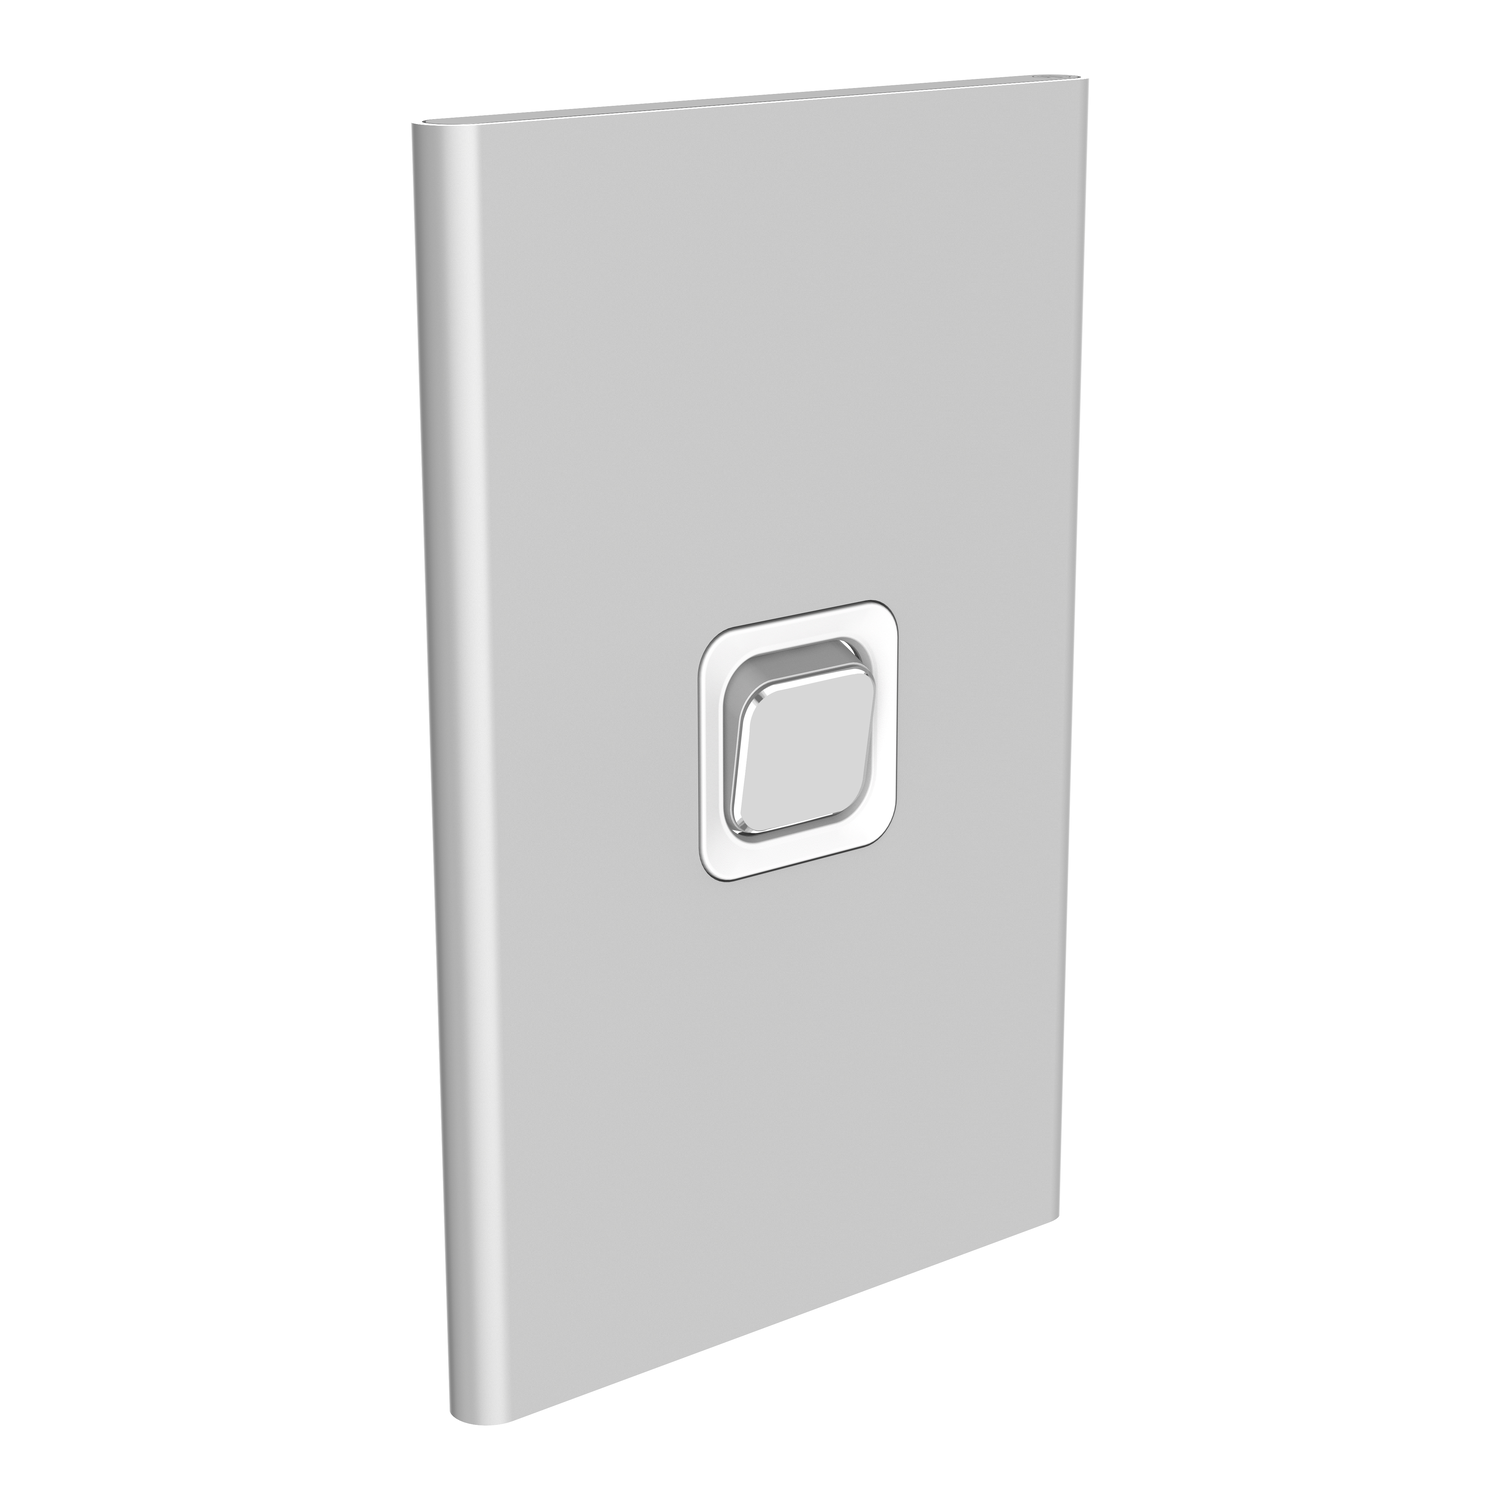 PDL Iconic Styl - Cover Plate Switch 1-Gang - Silver